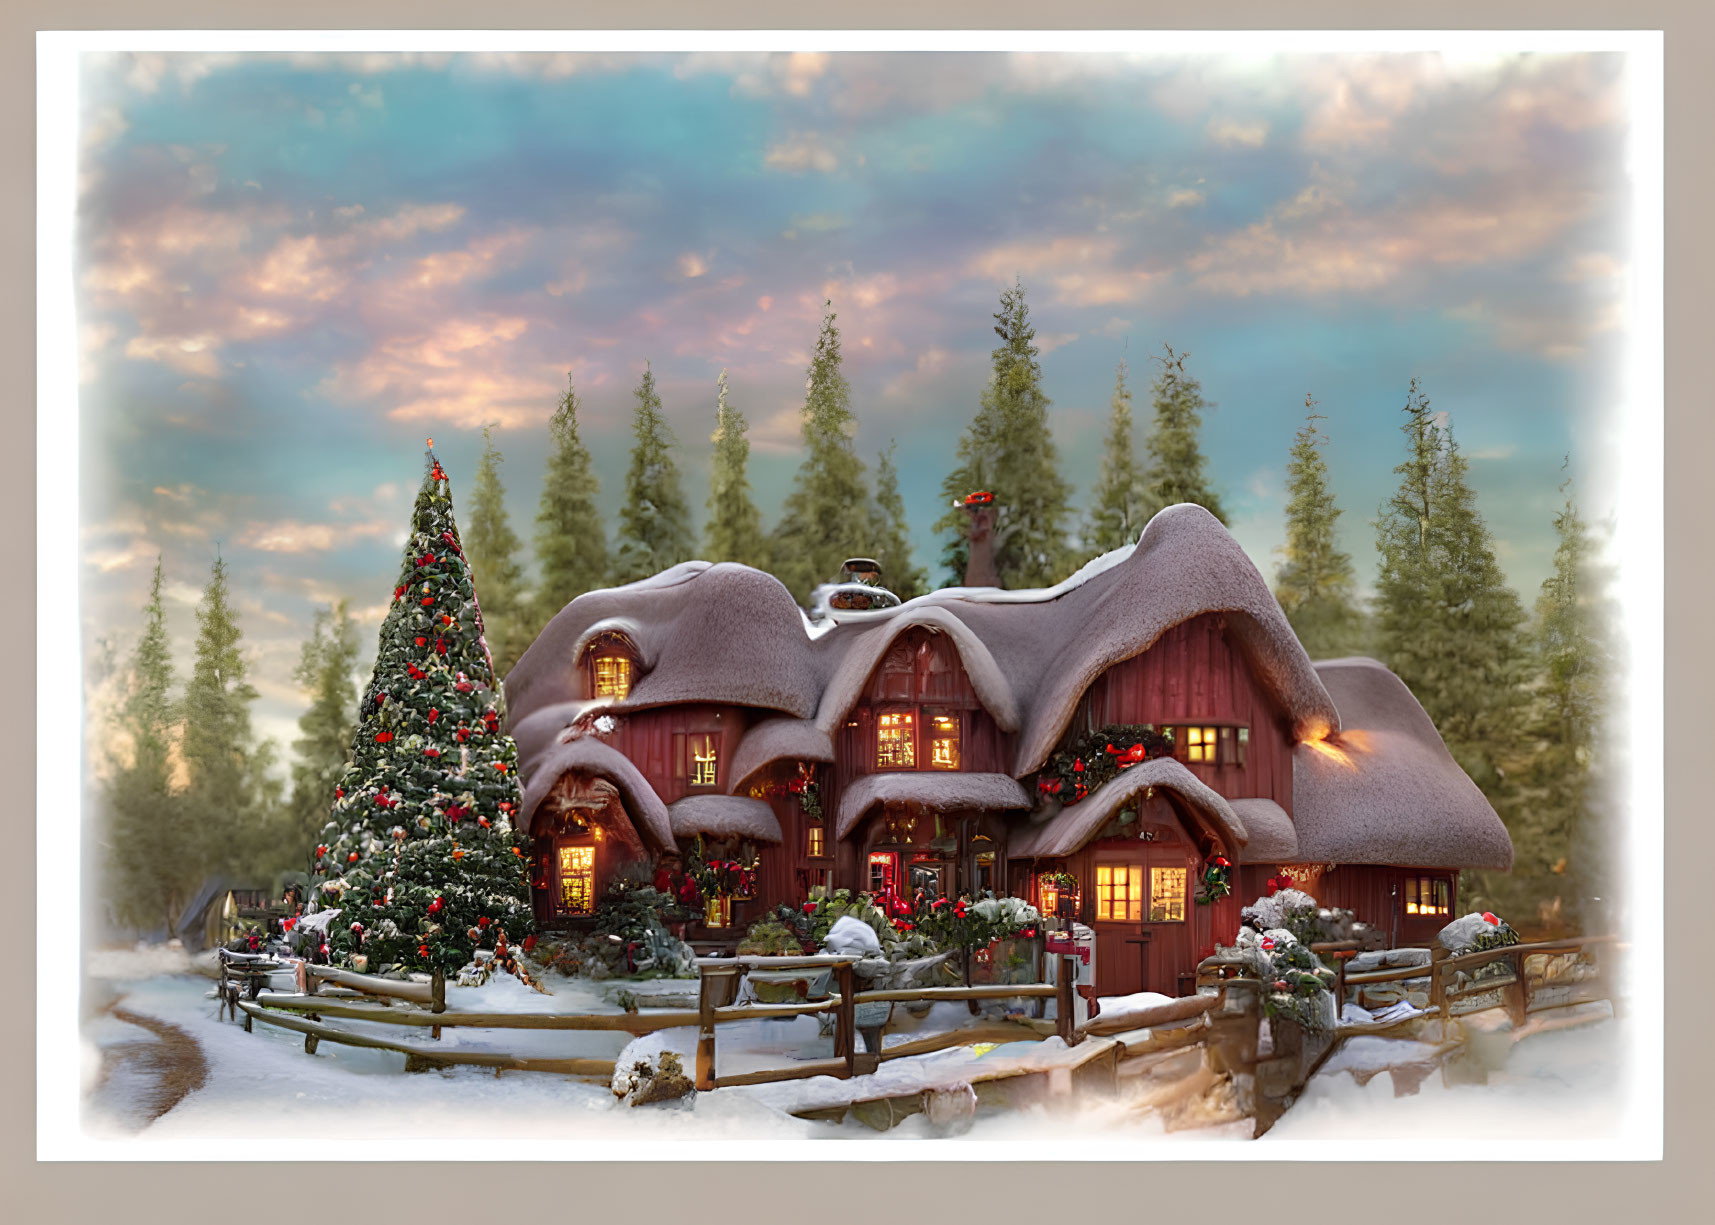 Snow-covered Christmas cottage in wintry pine forest at twilight